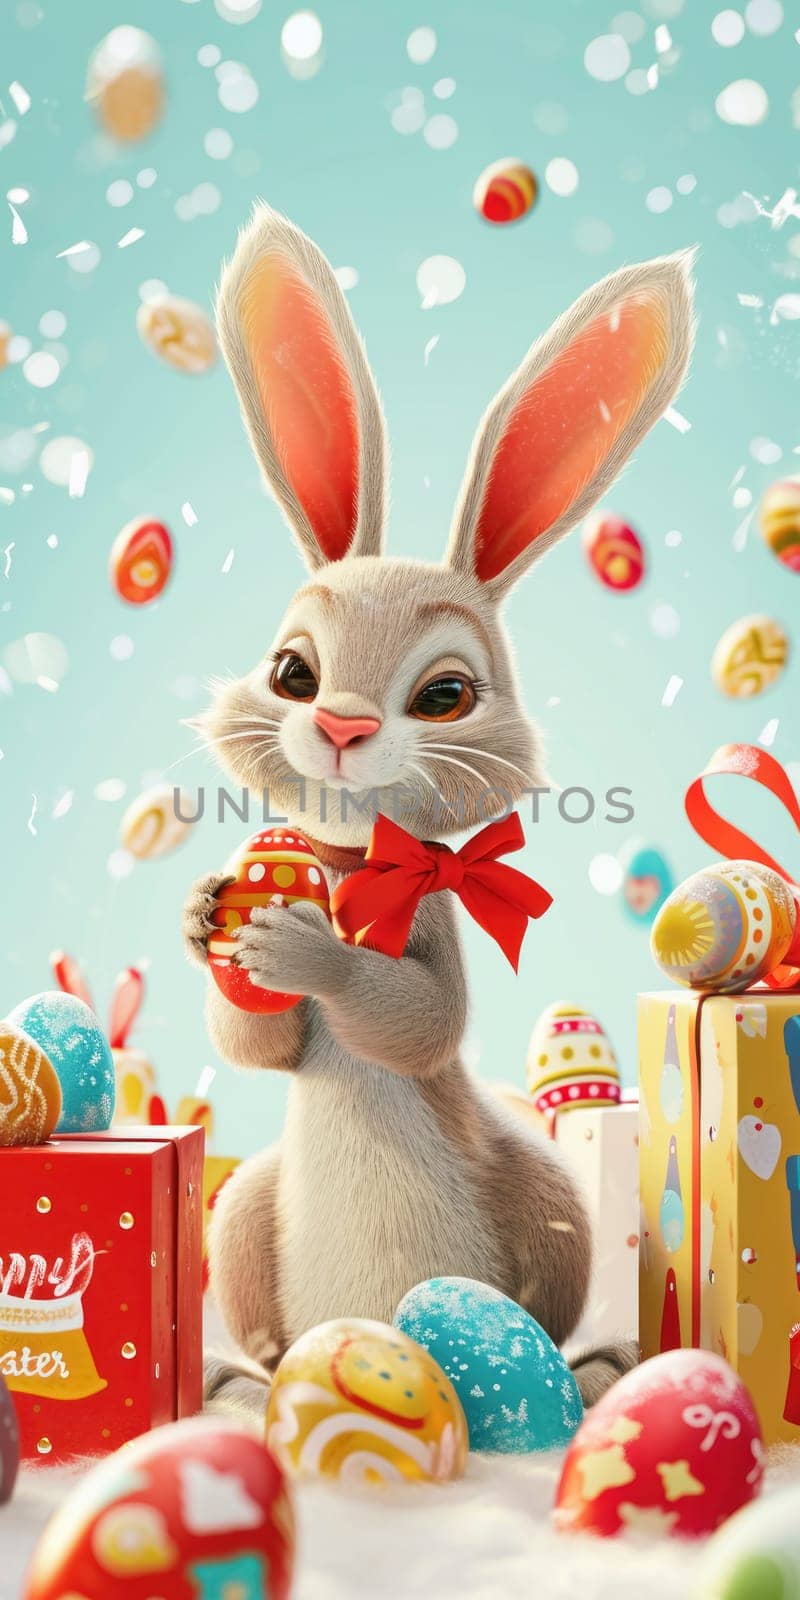 Adorable Easter Bunny with Decorative Eggs and Gifts by andreyz